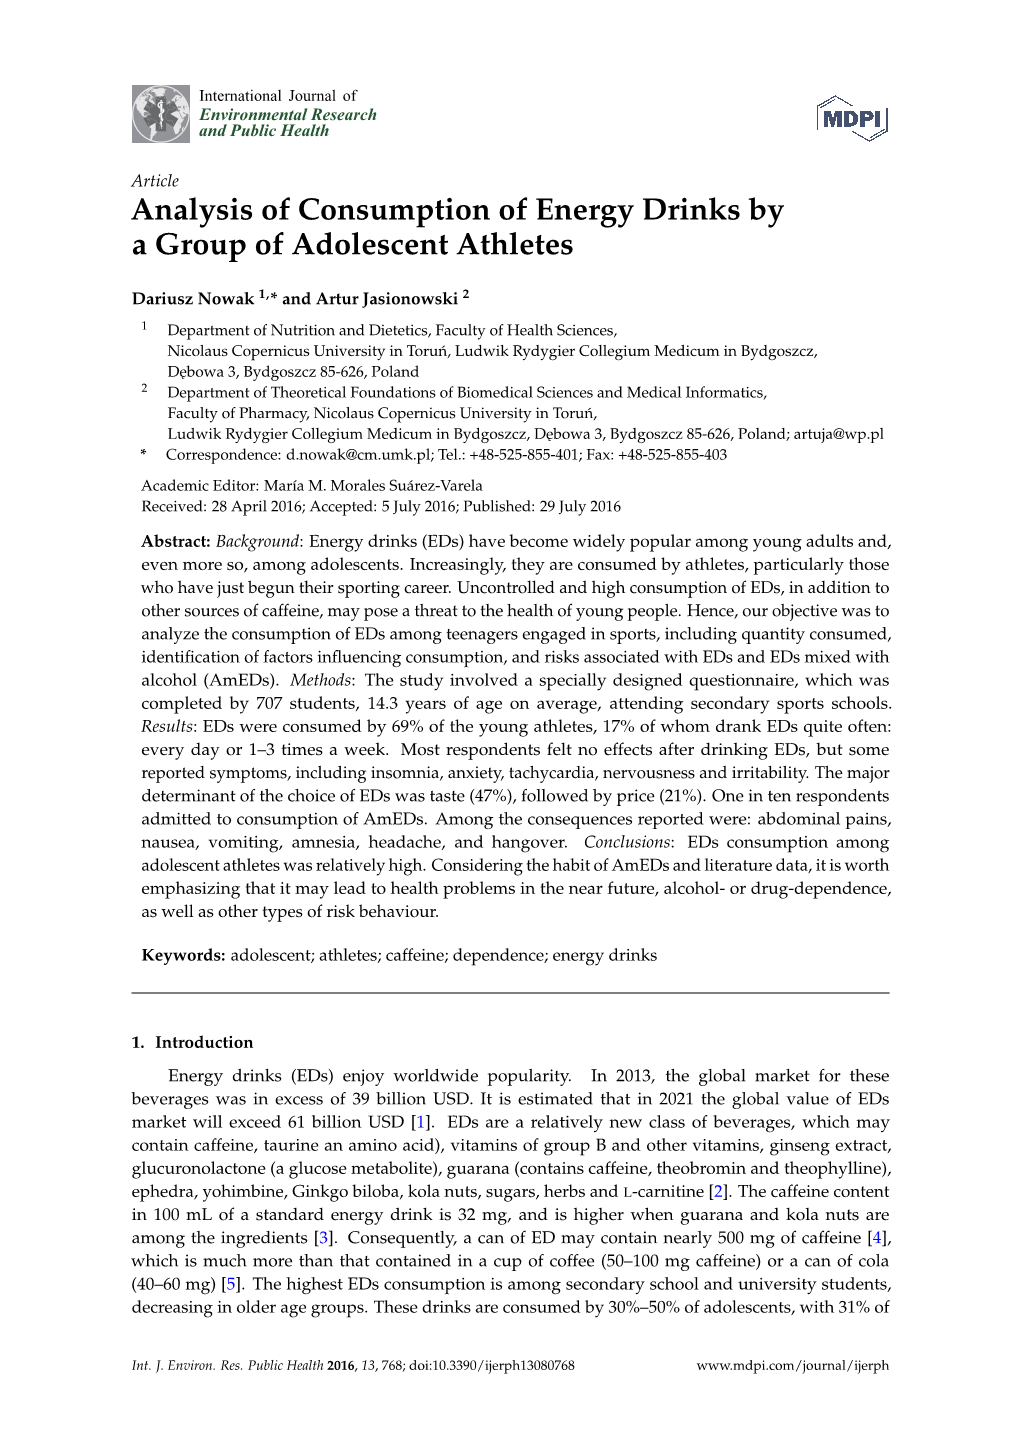 Analysis of Consumption of Energy Drinks by a Group of Adolescent Athletes